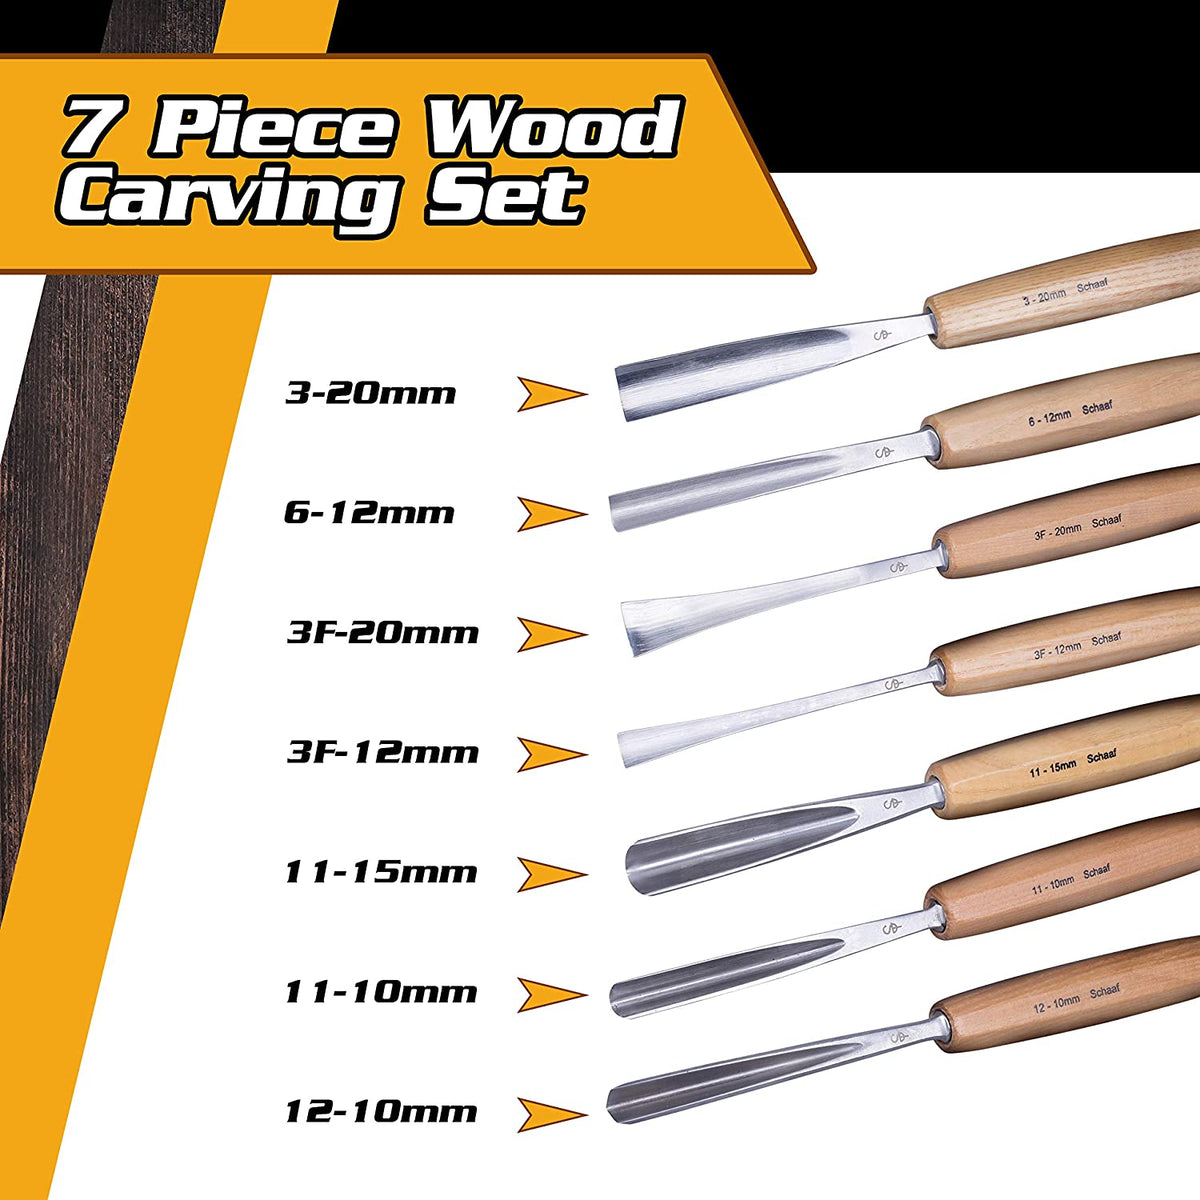  Schaaf Wood Carving Tools Knife KitWood Carving Kit